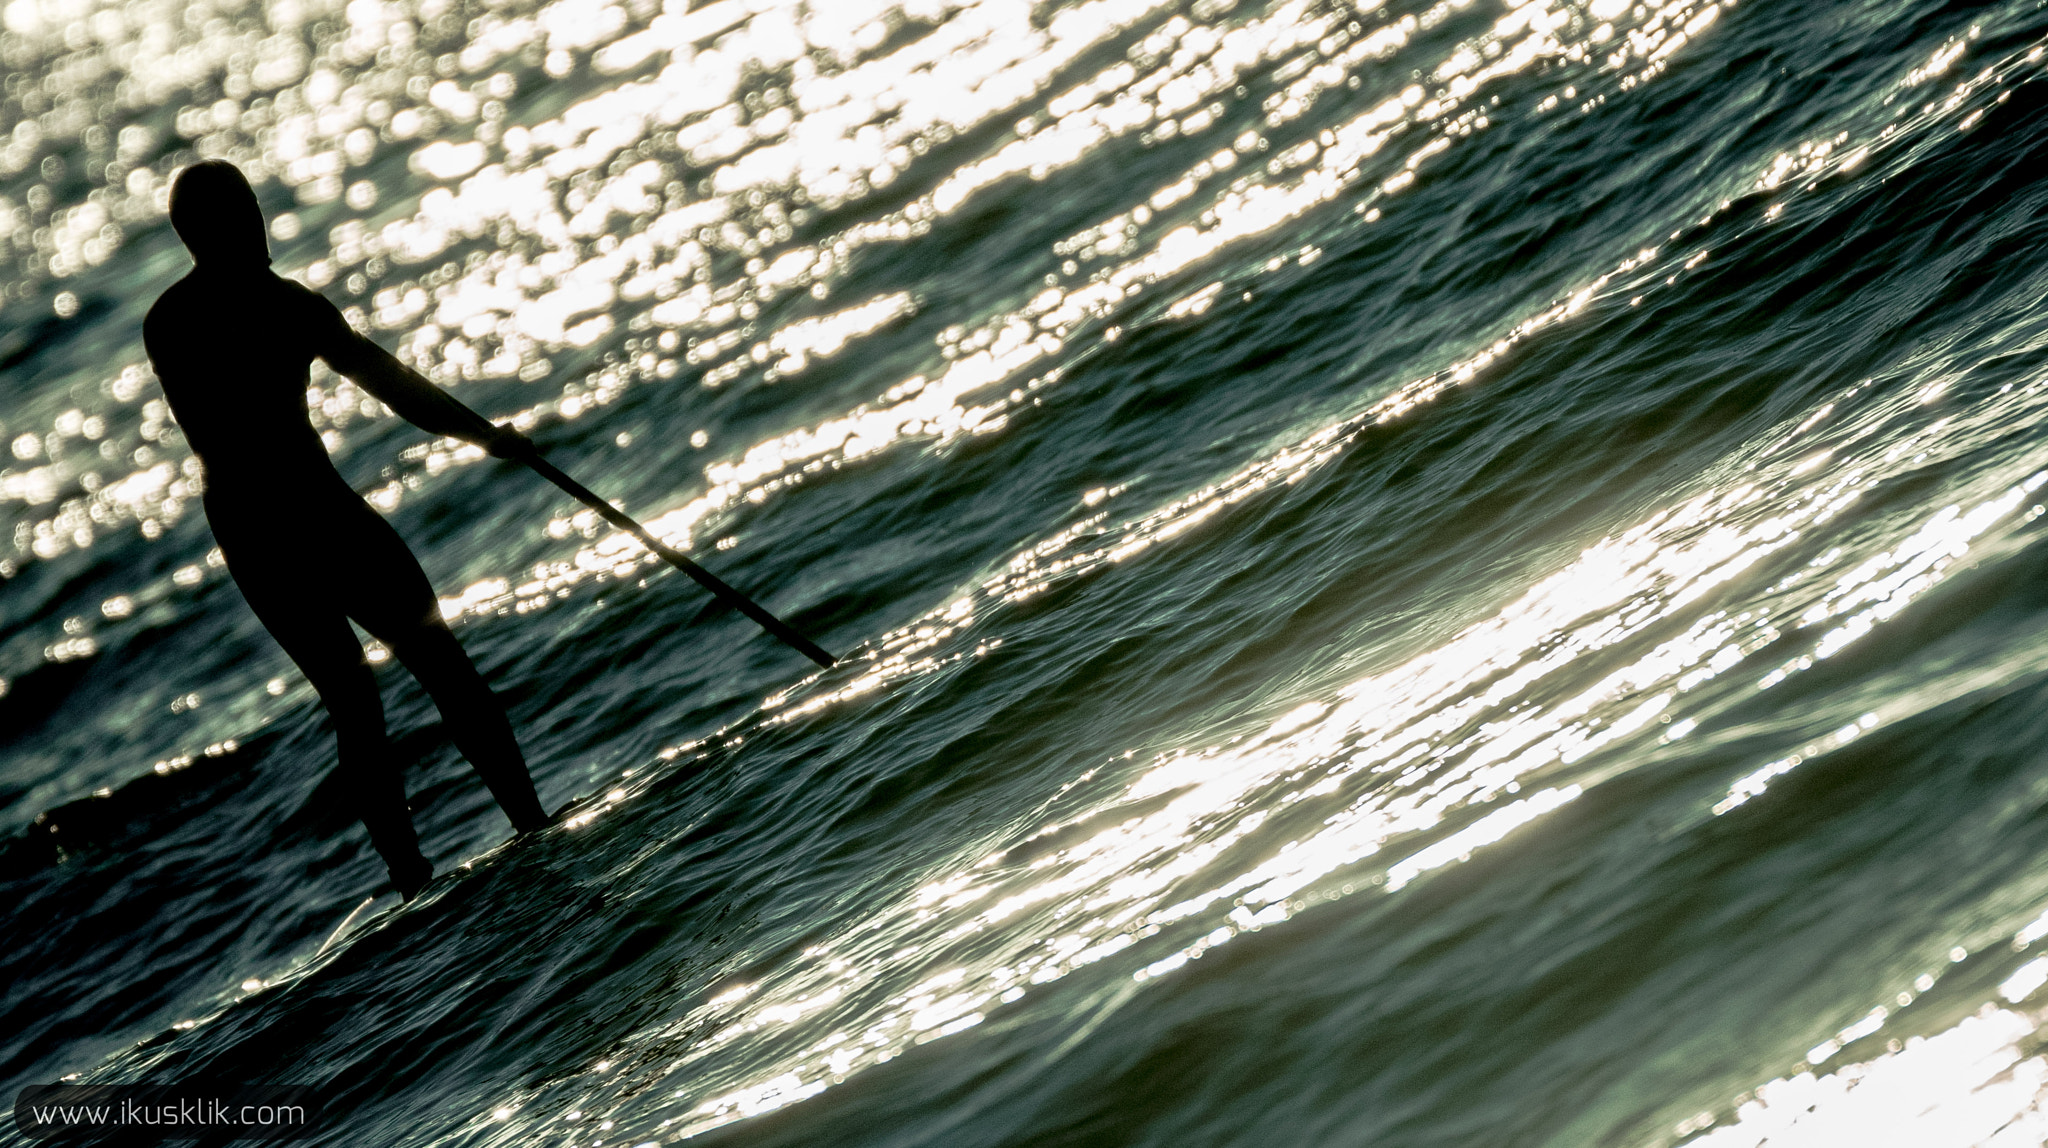 Sony a7R sample photo. Paddle surf photography